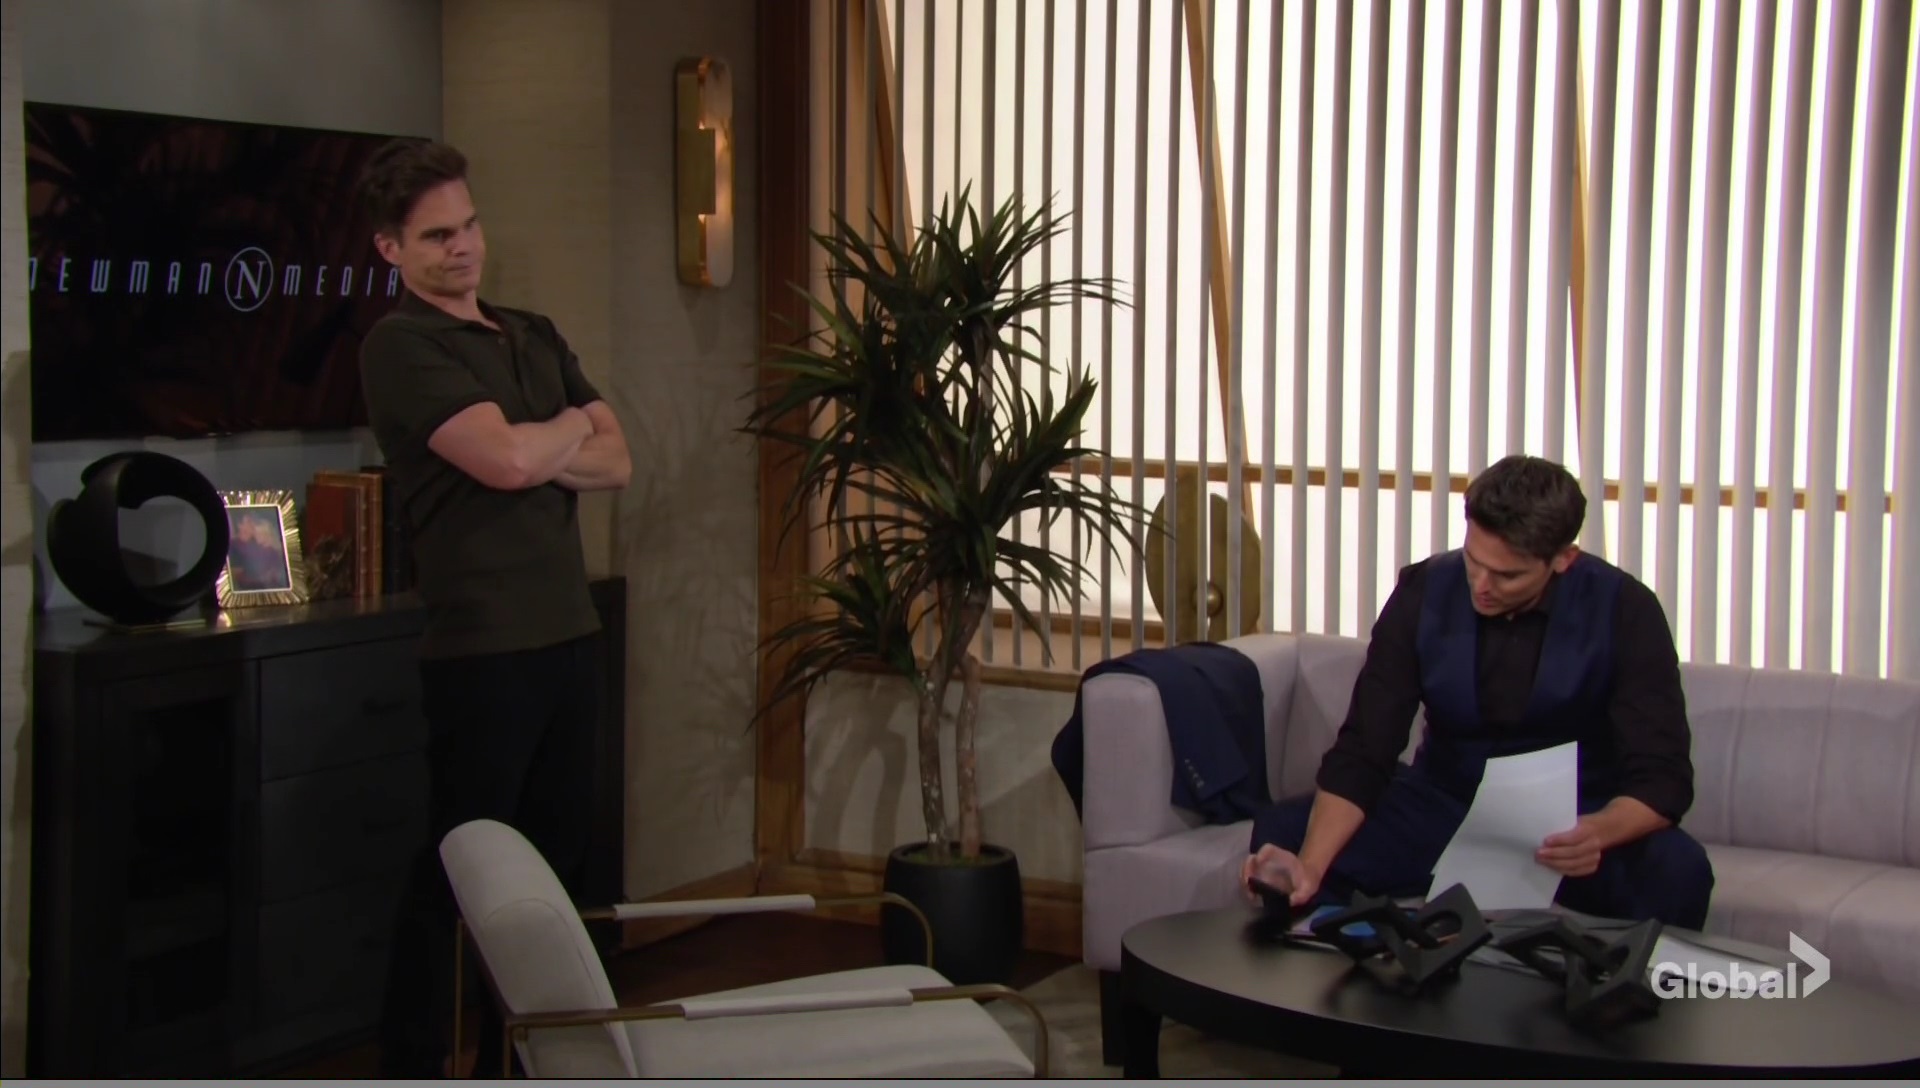 kevin faces adam young restless